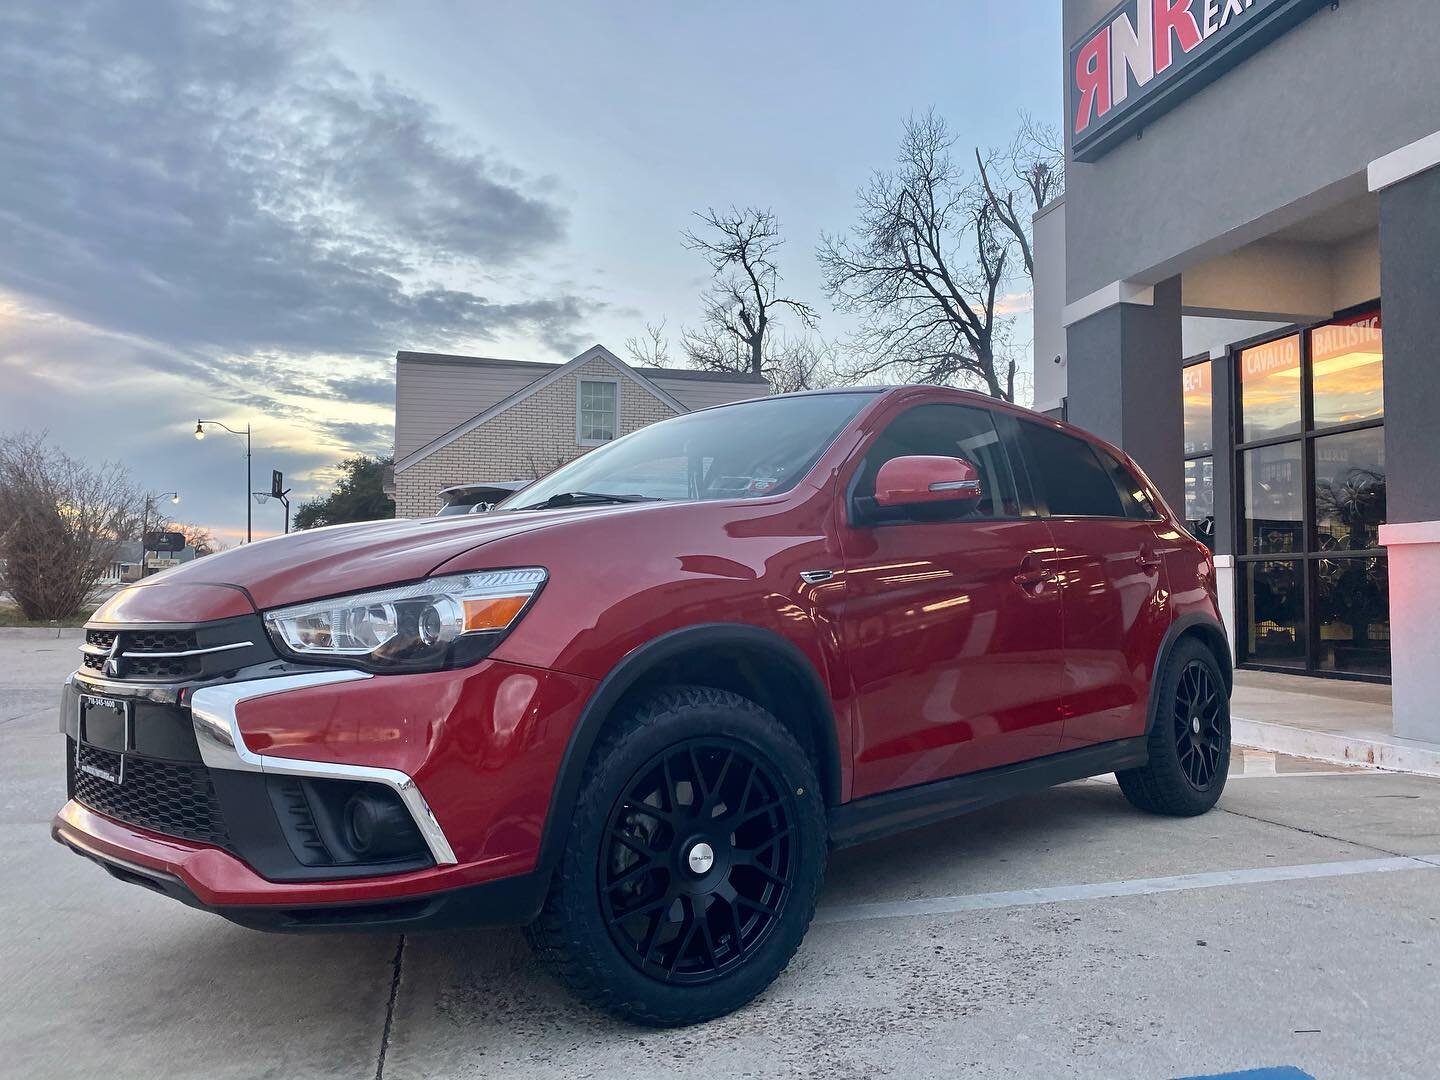 They came and got some #sothiswheels on this #mitsubishioutlander for just $5 down this December, and you can too! 💸 #mitsubishi #okc #localbusiness #rimsforsale